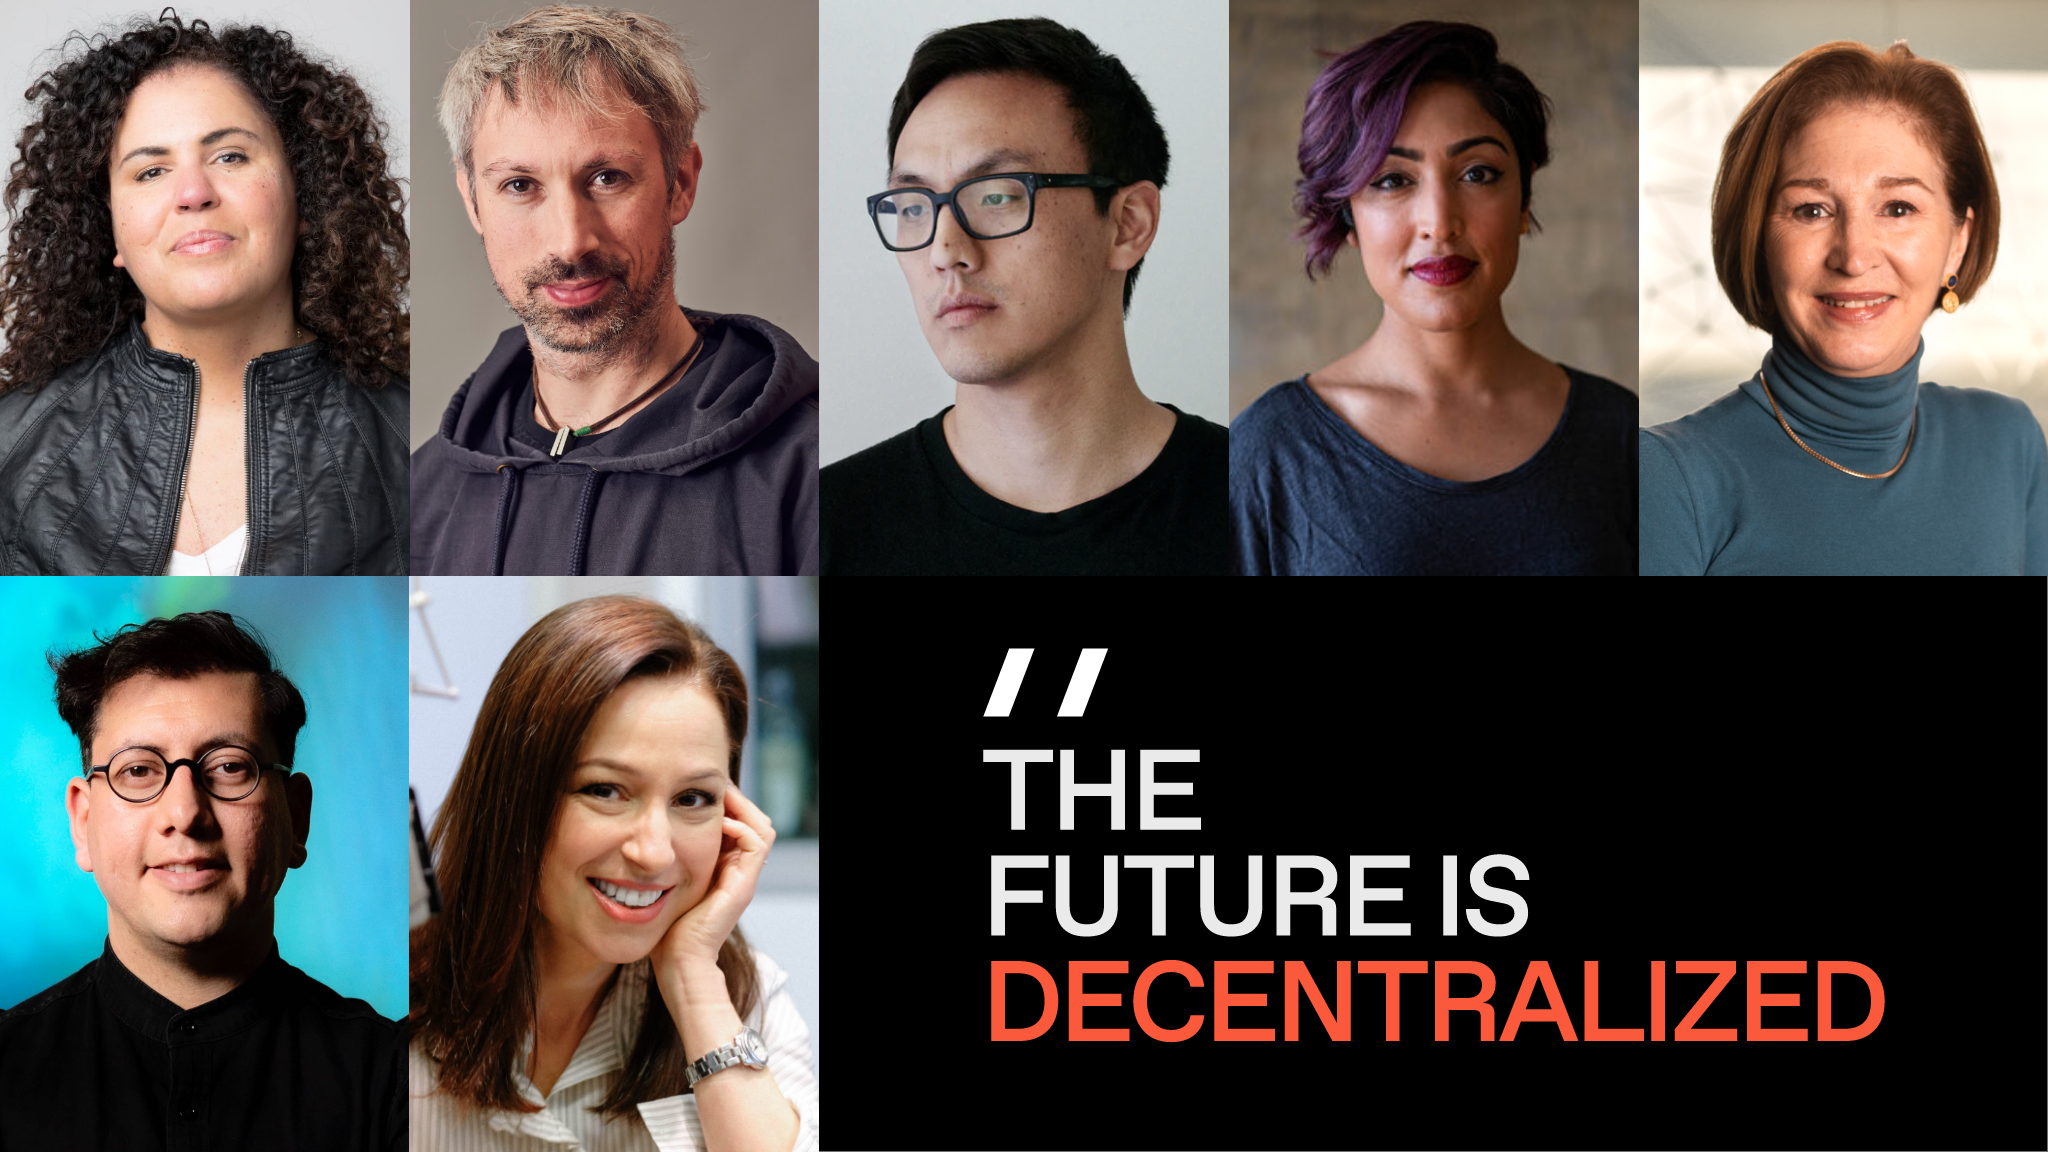 Two rows of headshots of artists and thinkers with a text to the side of the bottom row reading "The Future is decentralized"